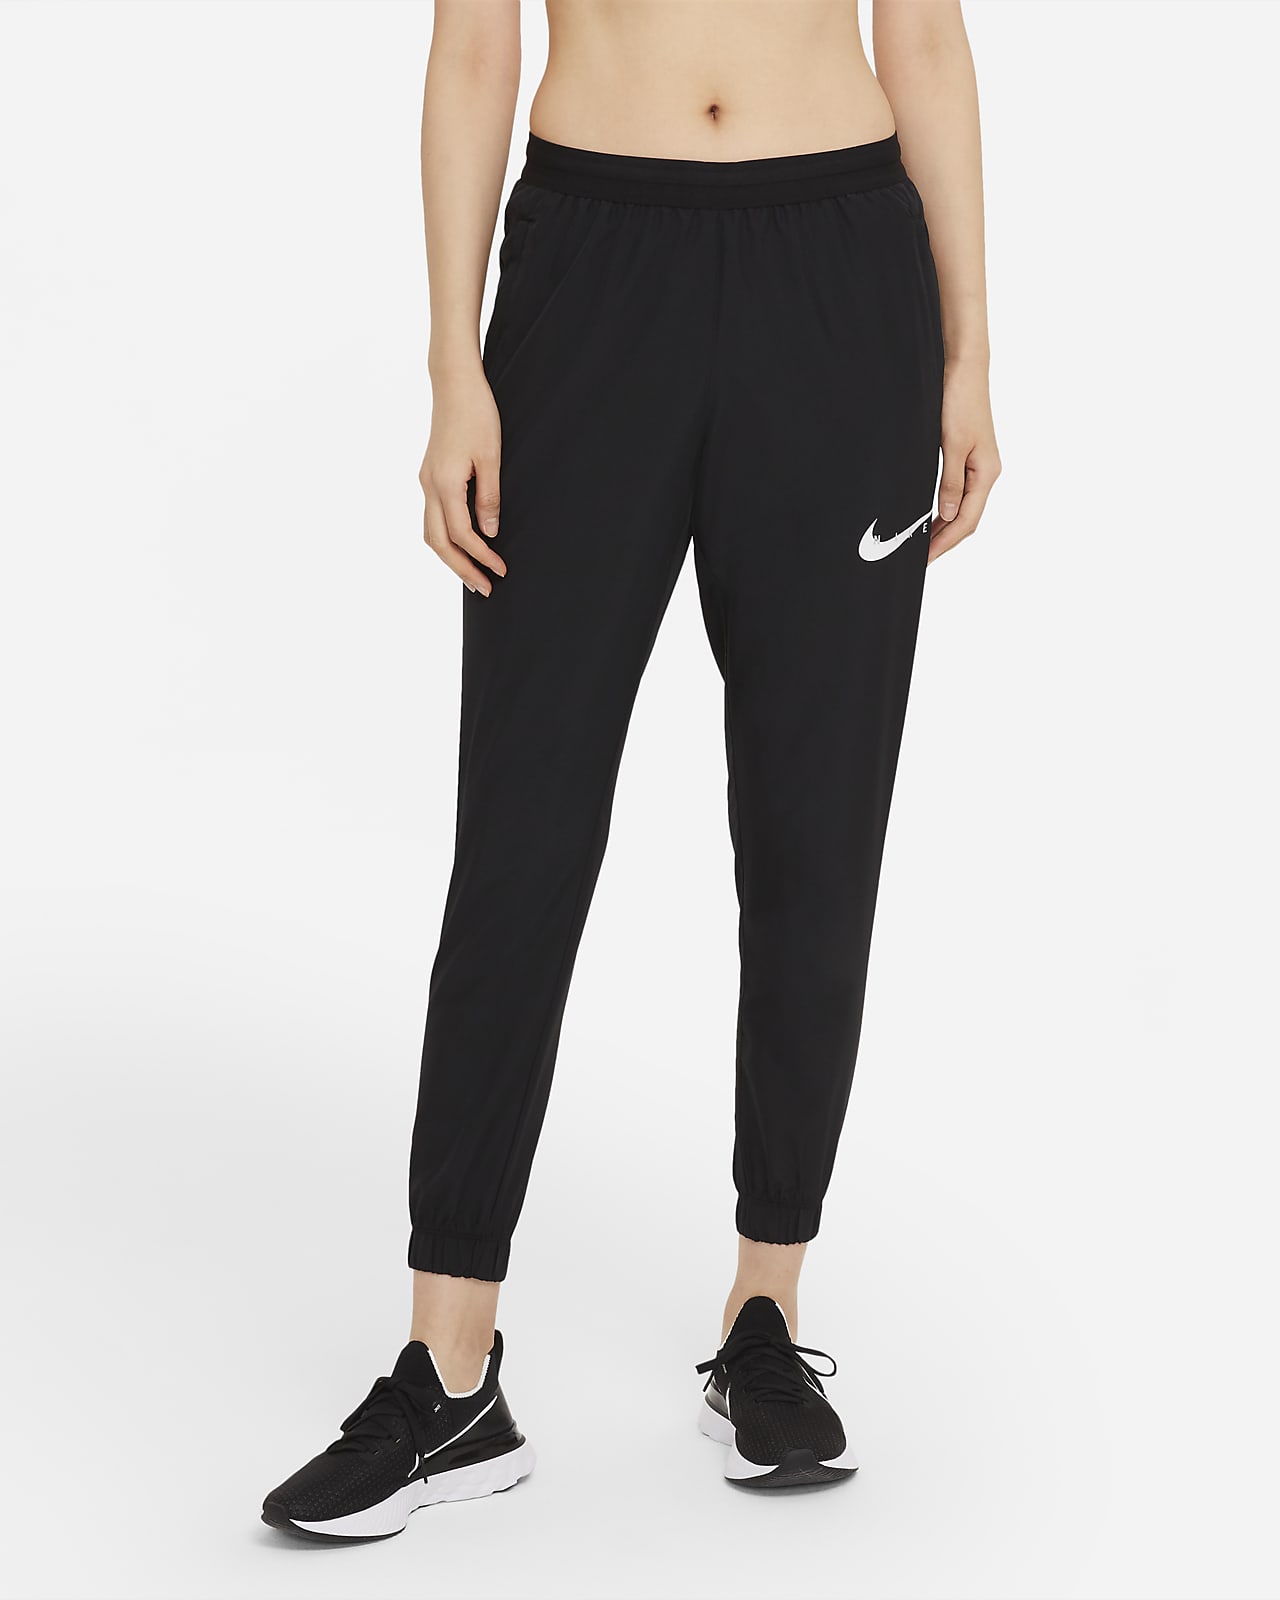 NIKE Sportswear Trend Pintuck Pants mica green Track Pants online at SNIPES